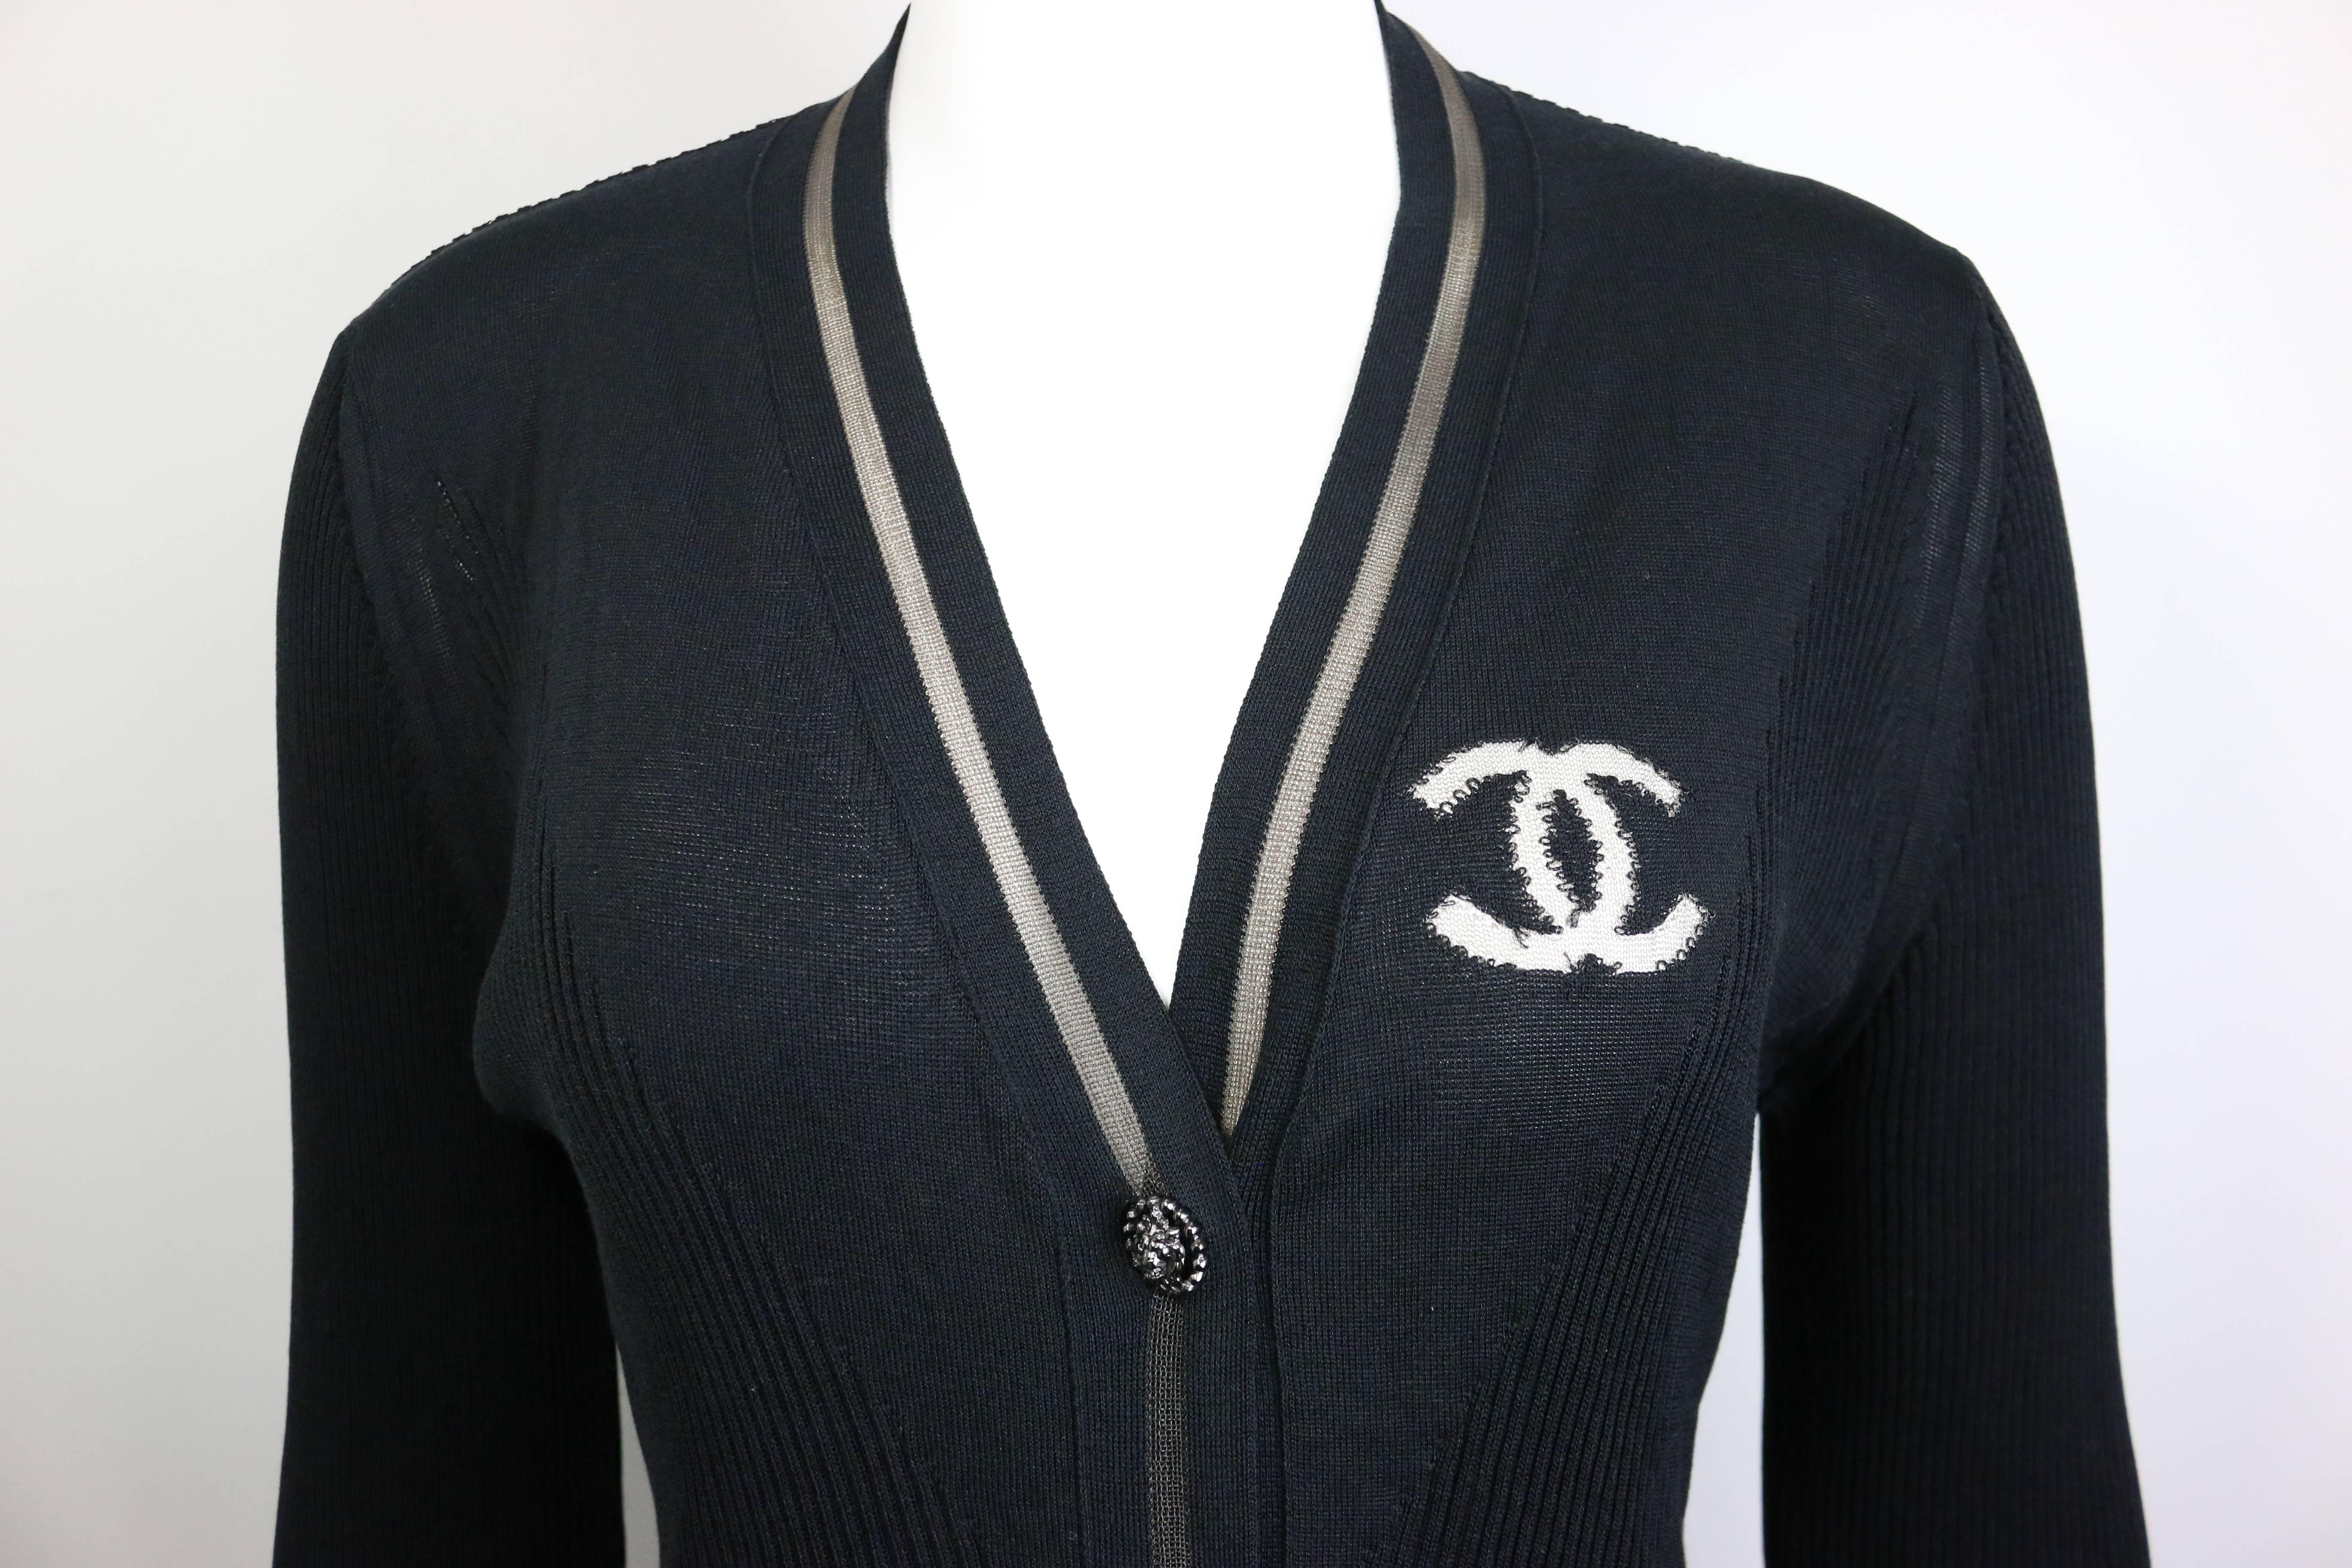 - Chanel black stripe cotton and silk long cardigan. Featuring mesh "CC" logo on the left front and shawl neck mesh trim with five front silver "Lion" buttons closure. Two side pockets with silver "Lion" buttons. This